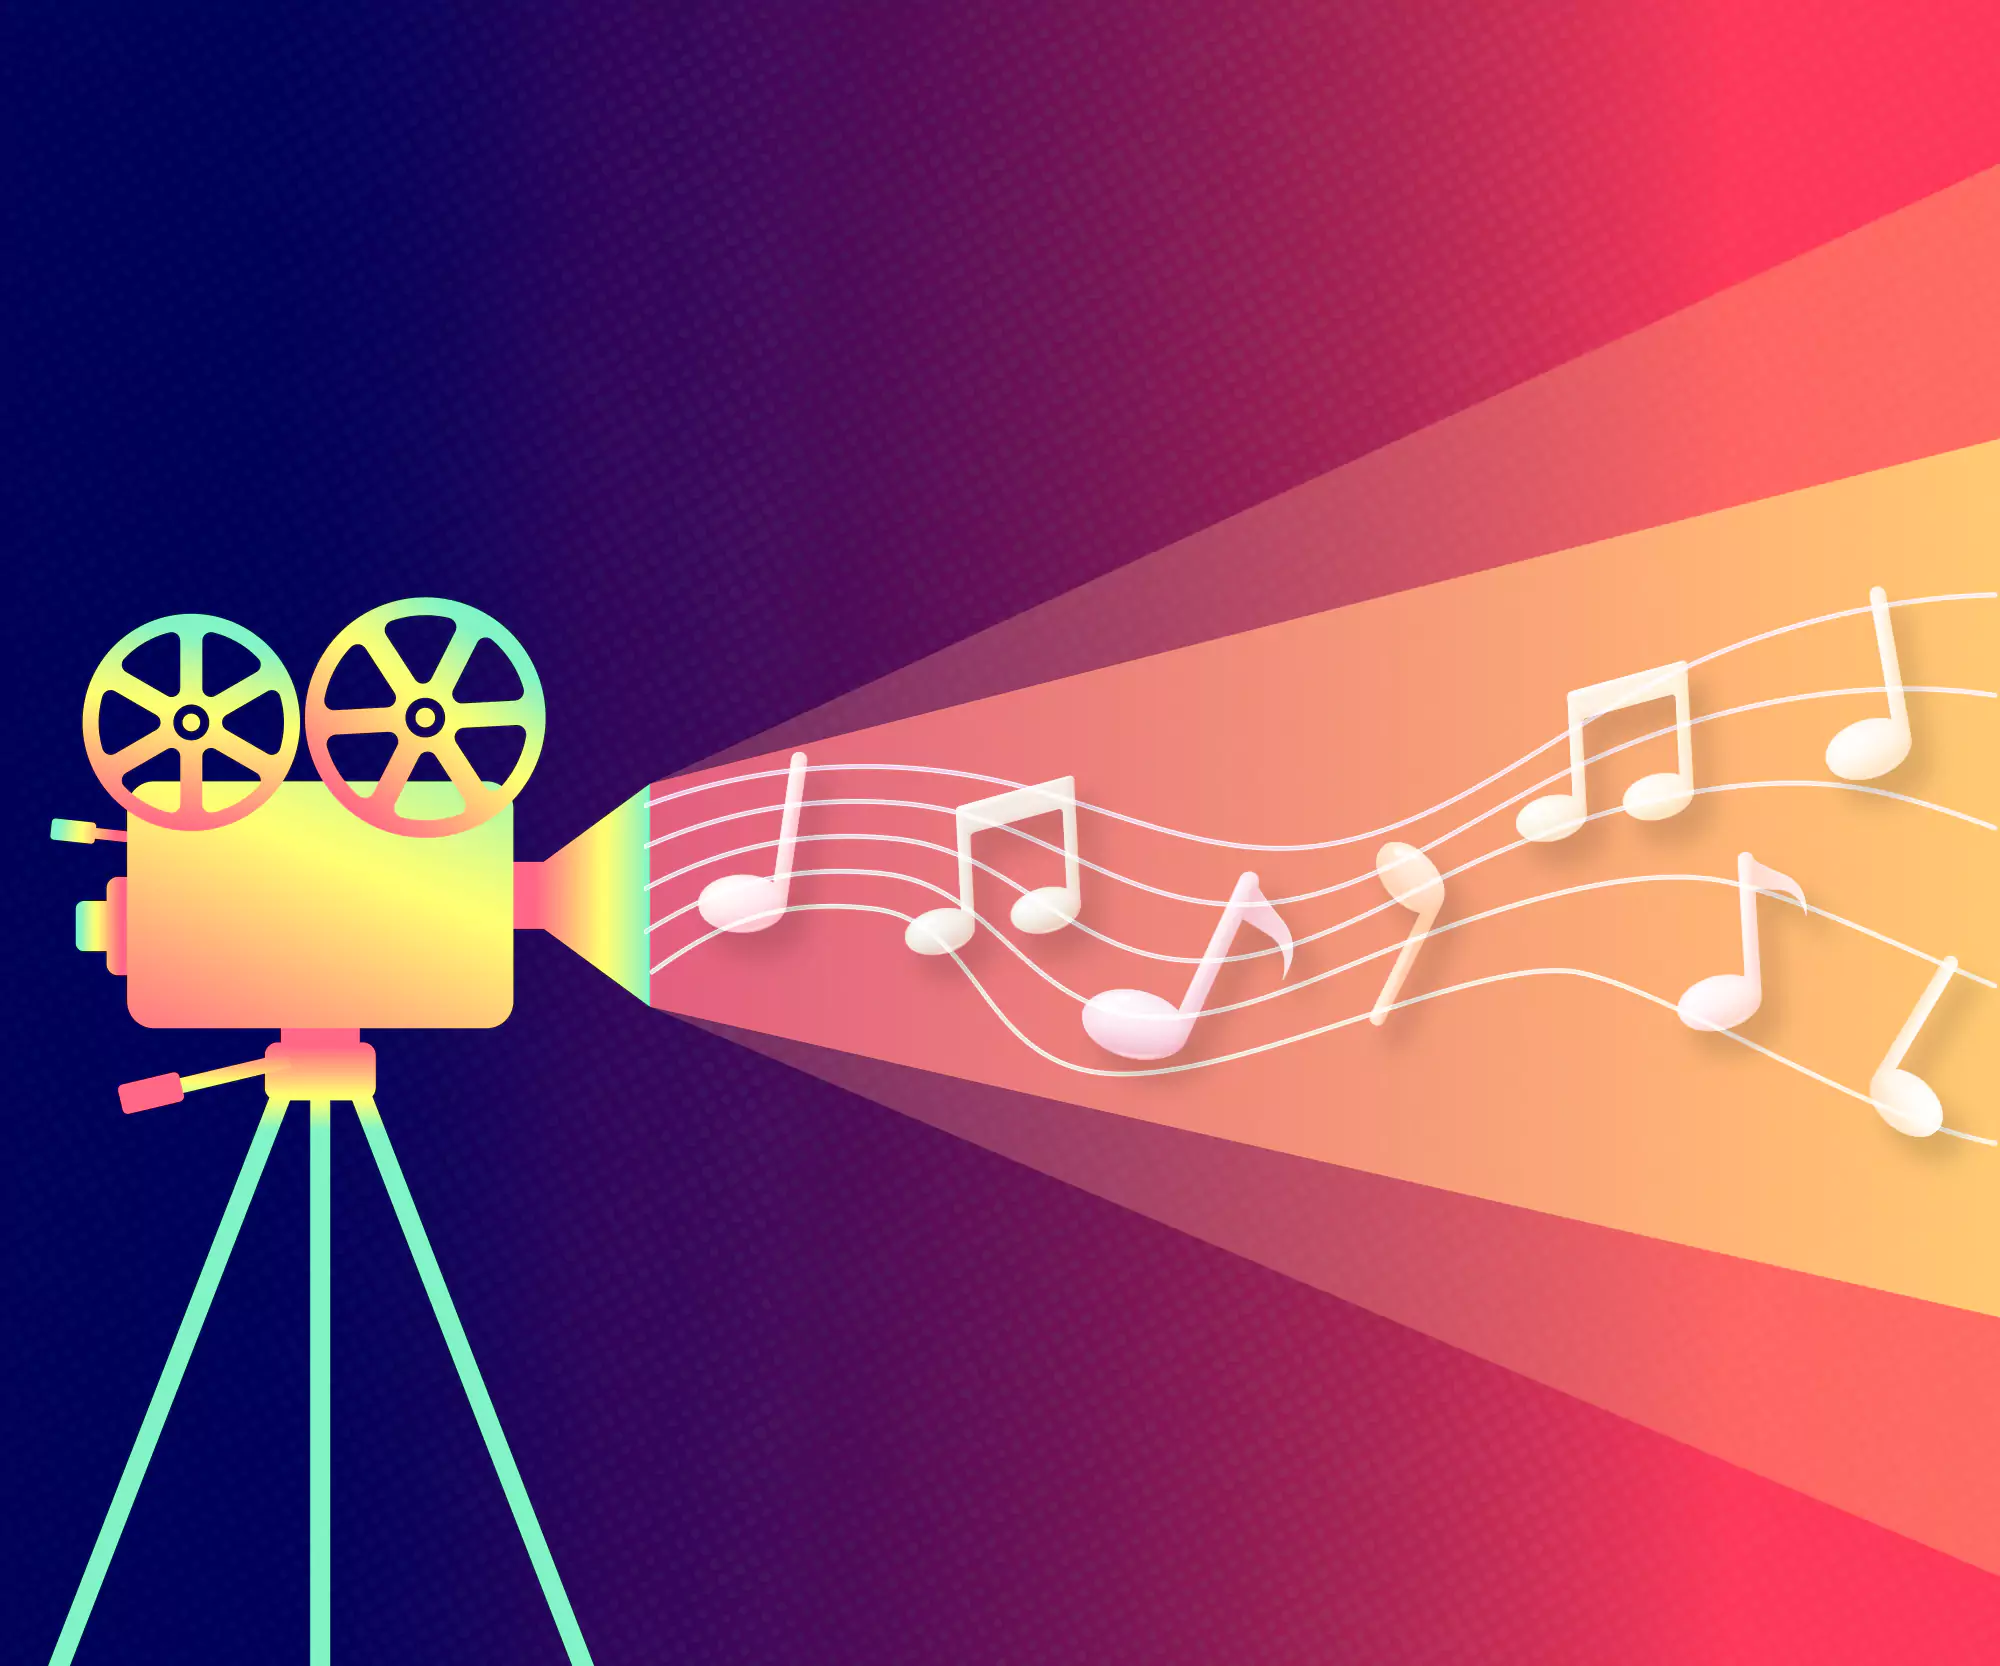 Music in movies